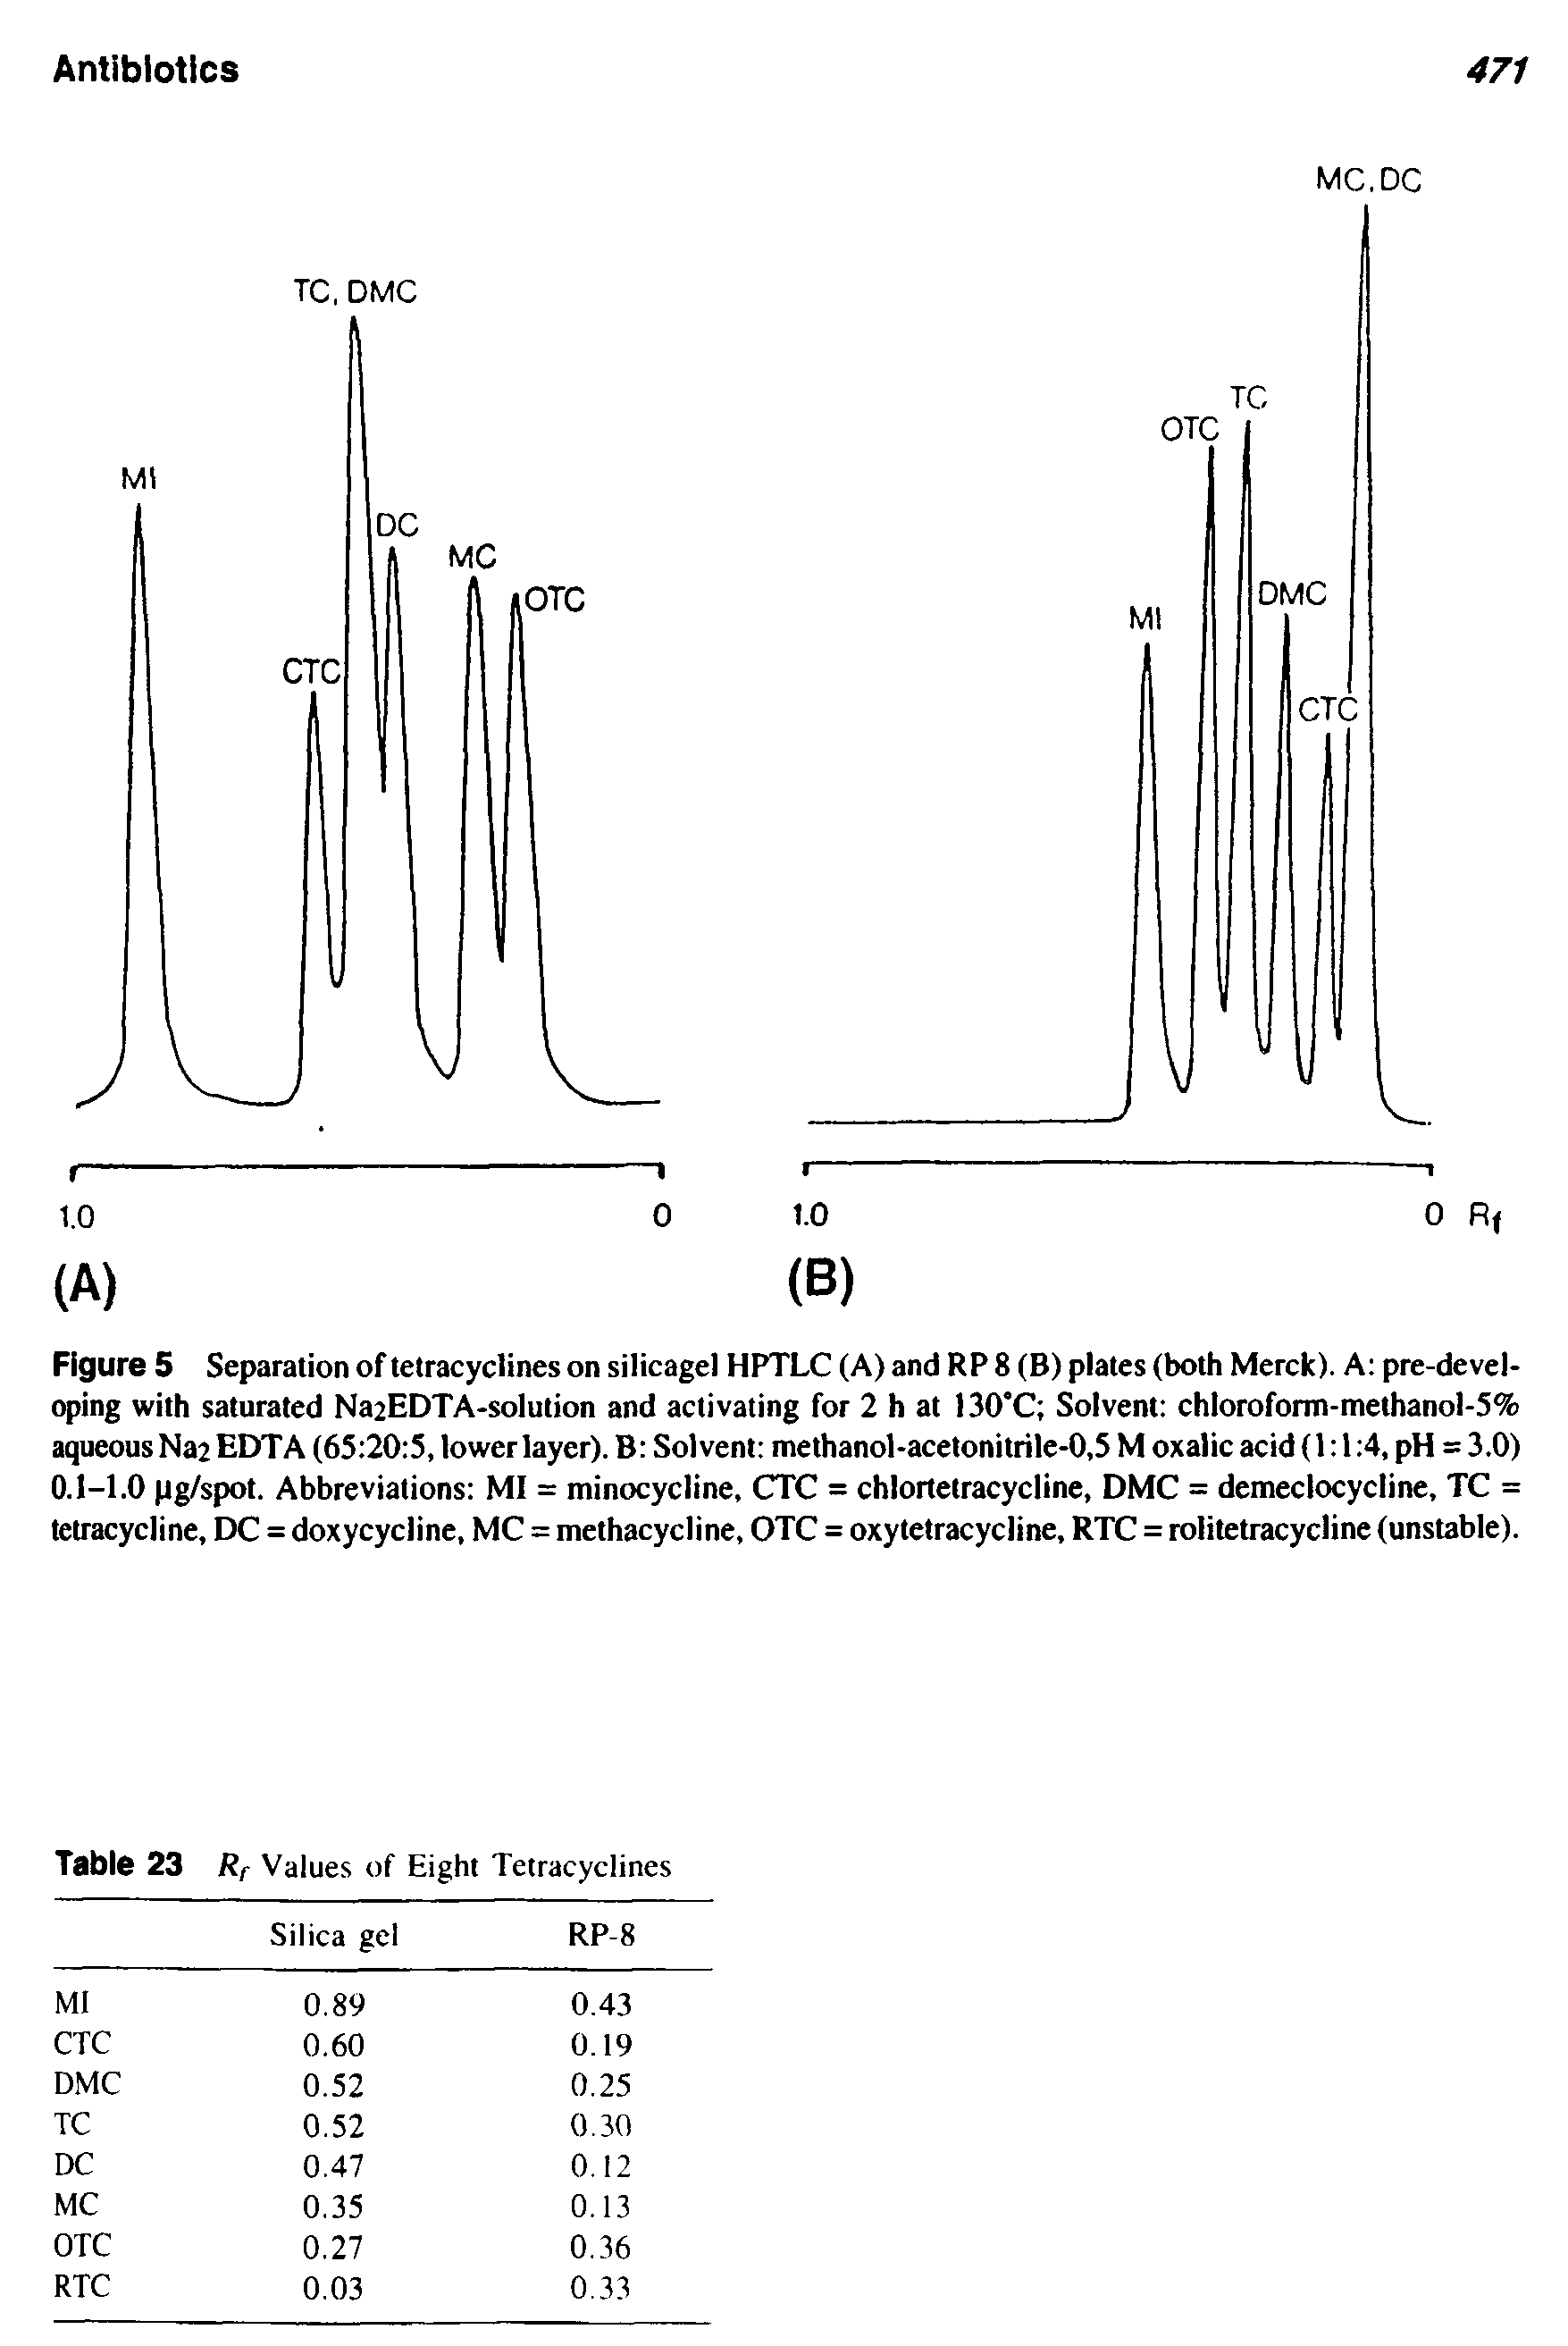 Figure 5 Separation of tetracyclines on silicagel HPTLC (A) and RP 8 (B) plates (both Merck). A pre-devel-oping with saturated Na2EDTA-solution and activating for 2 h at I30 C Solvent chloroform-methanol-S% aqueous Naa EDTA (65 20 5, lower layer). B Solvent methanol-acetonitrile-0,5 M oxalic acid (1 1 4, pH = 3.0) 0.1-1.0 pg/spot. Abbreviations MI = minocycline, CTC = chlortetracycline, DMC = demeclocycline, TC = tetracycline, DC = doxycycline, MC = methacycline, OTC = oxytetracycline, RTC = rolitetracycline (unstable).